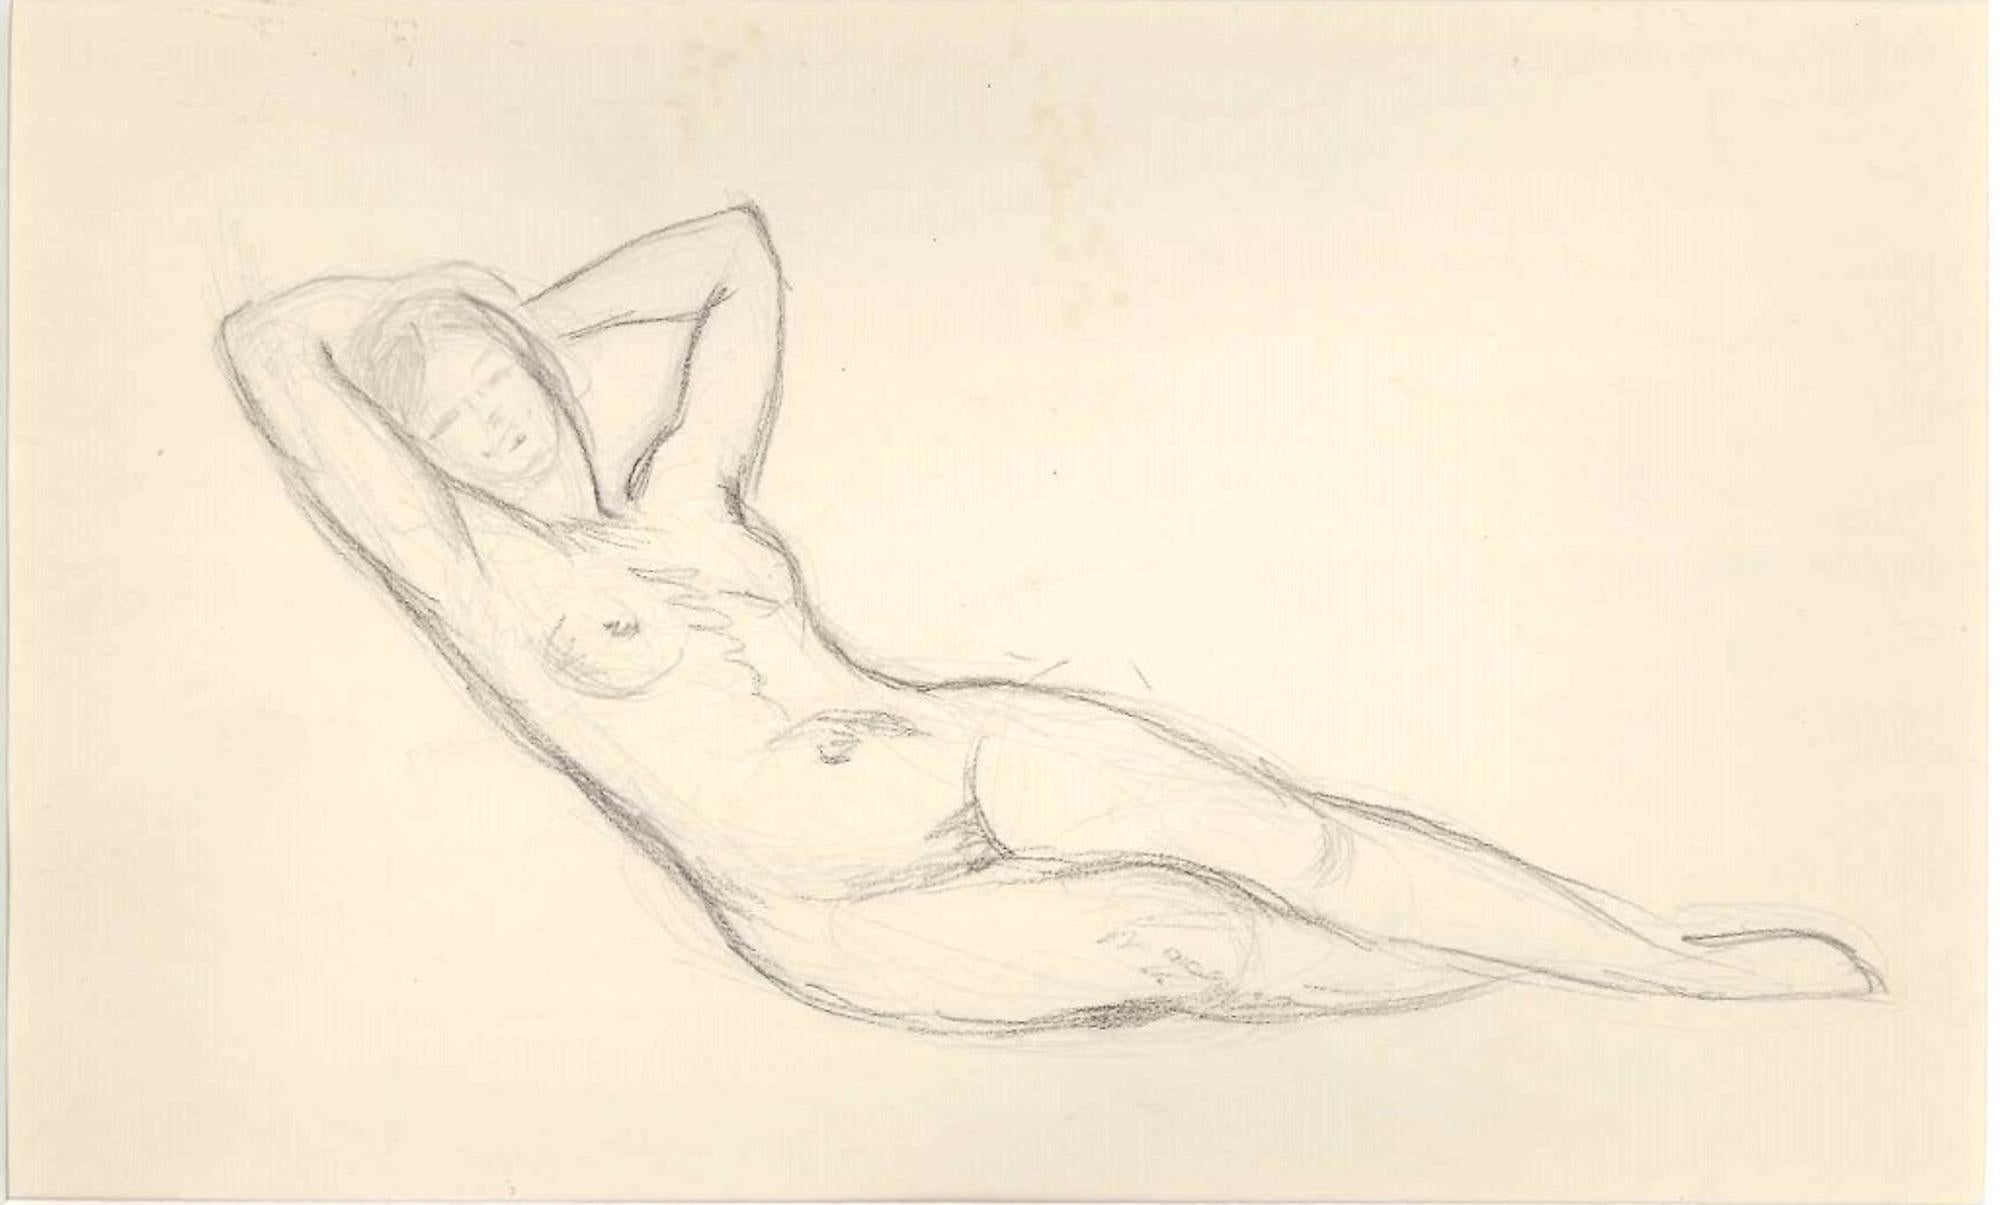 Unknown Figurative Art - Lying Female Nude   - Original Drawing - Early 20th Century